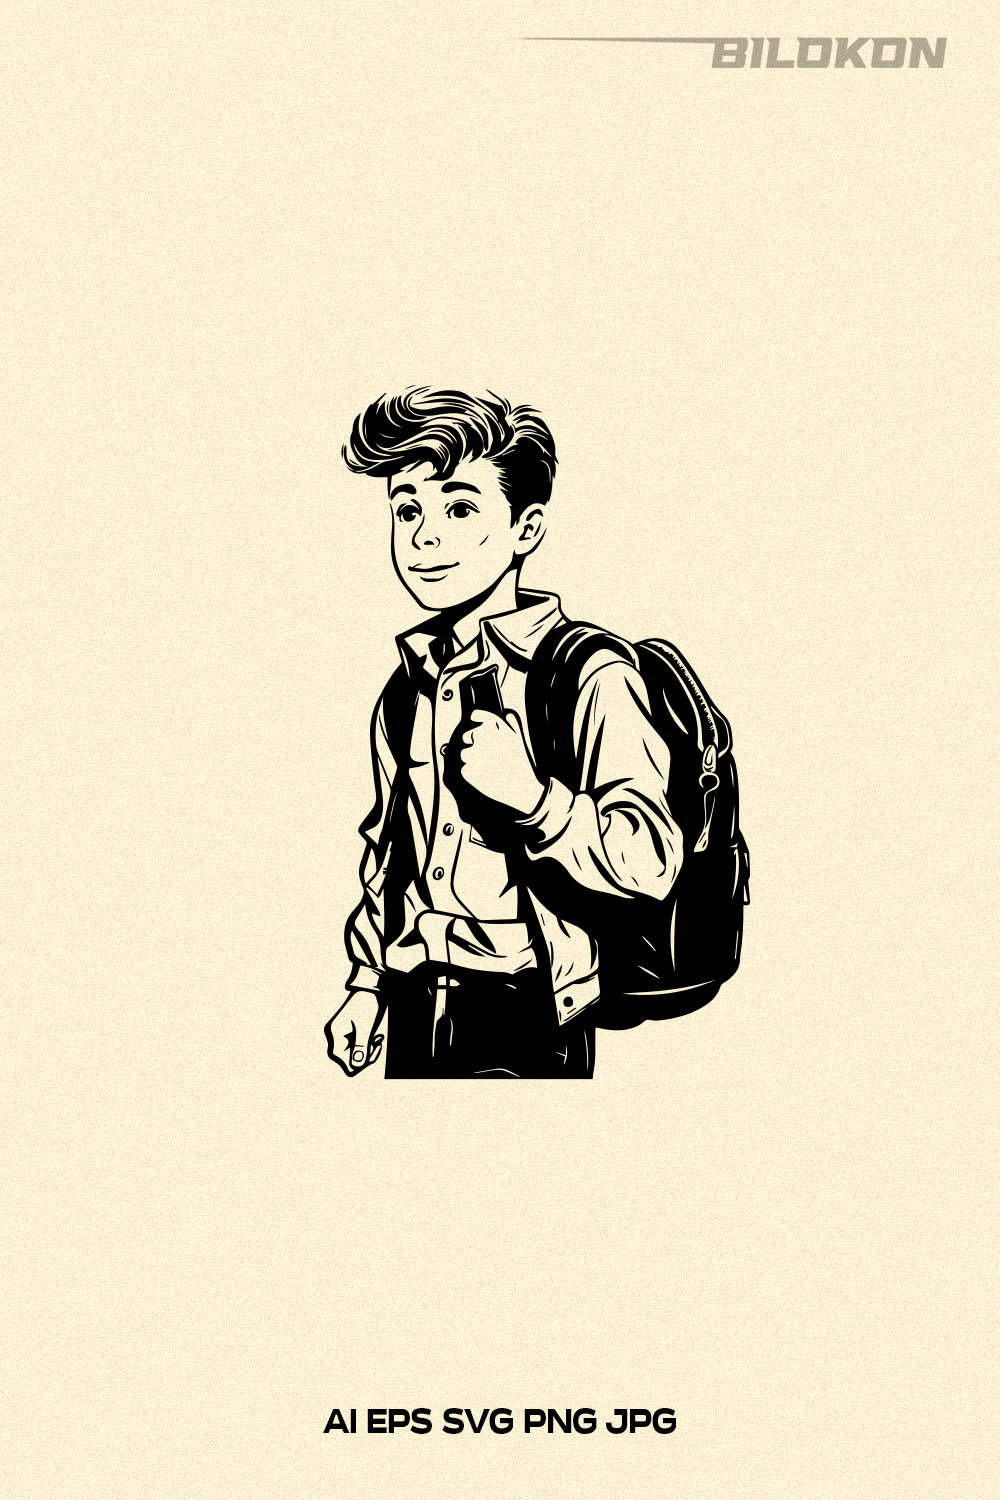 Vintage boy with a backpack goes to school, SVG Vector pinterest preview image.